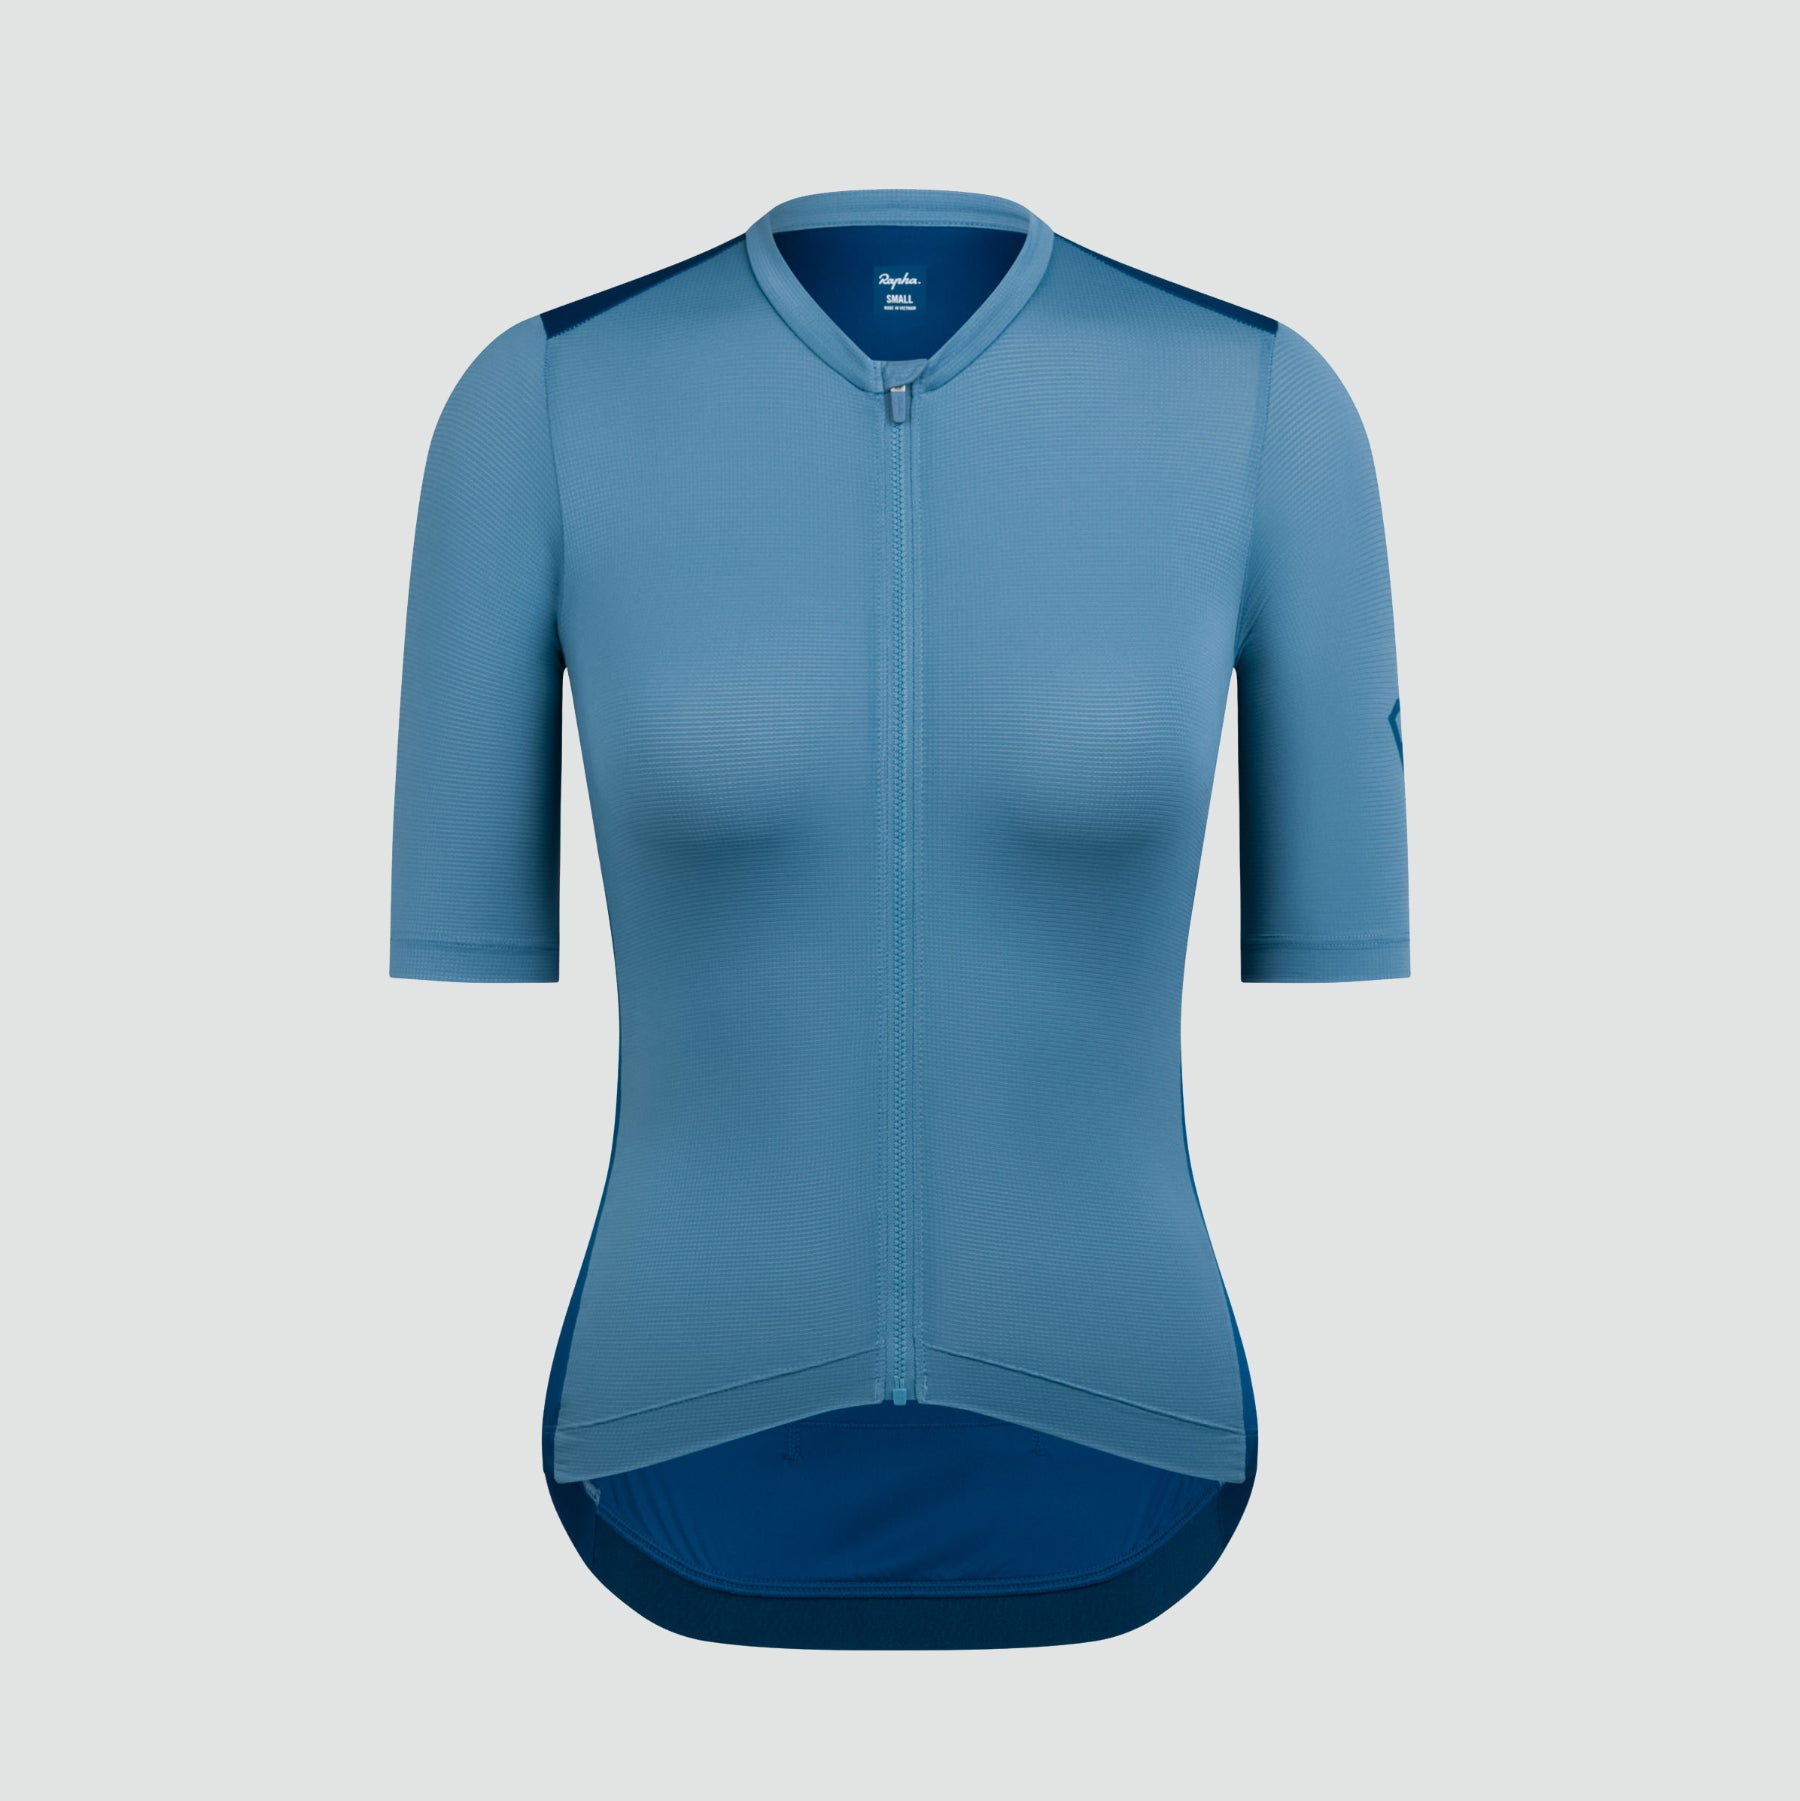 Maillot Pro Team Training Femme  - Dusted Blue/Jewelled Blue